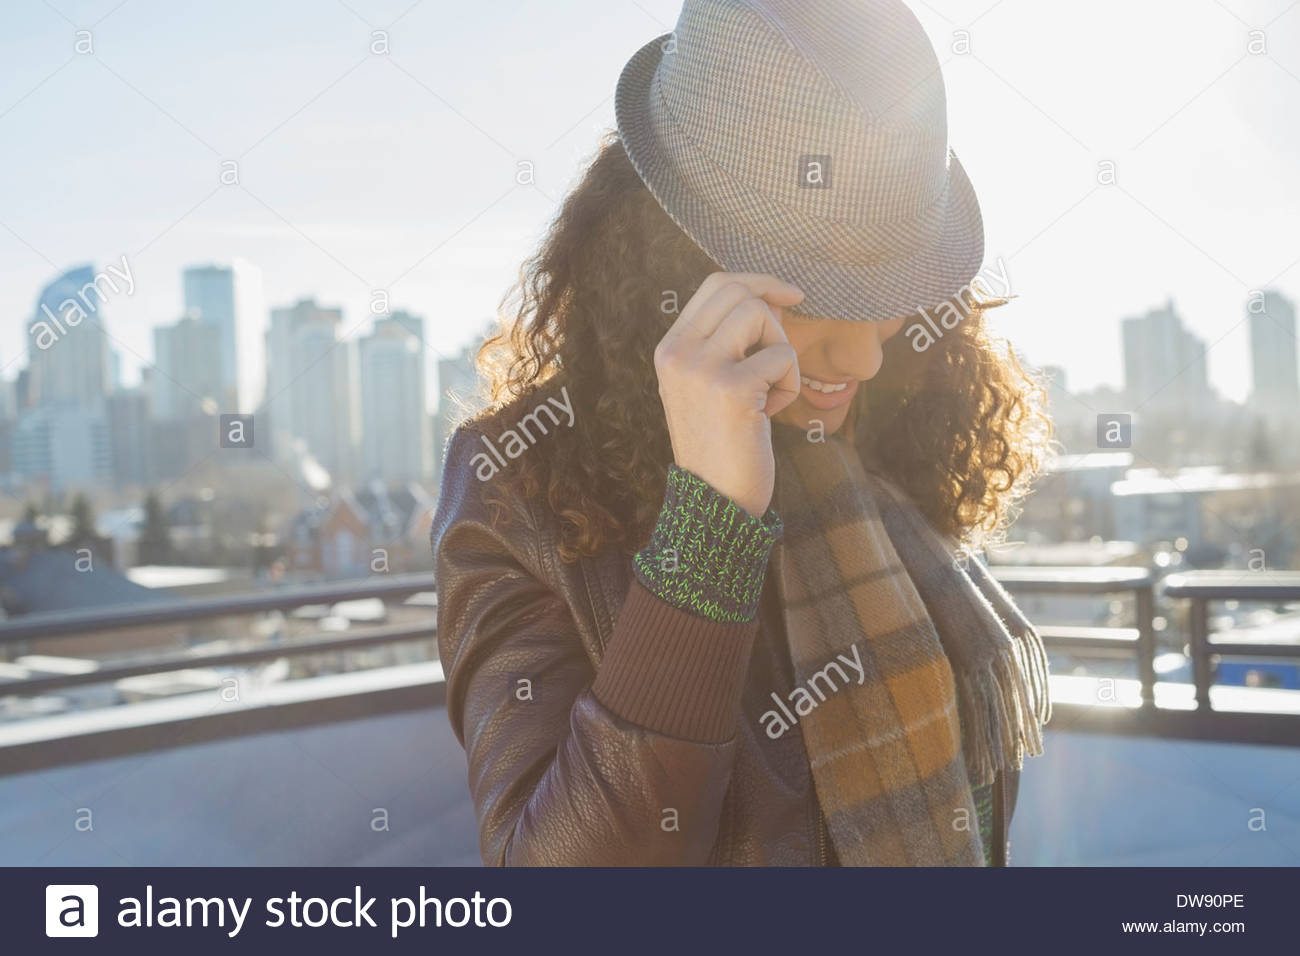 Fashionable woman wearing hat outdoors Stock Photo